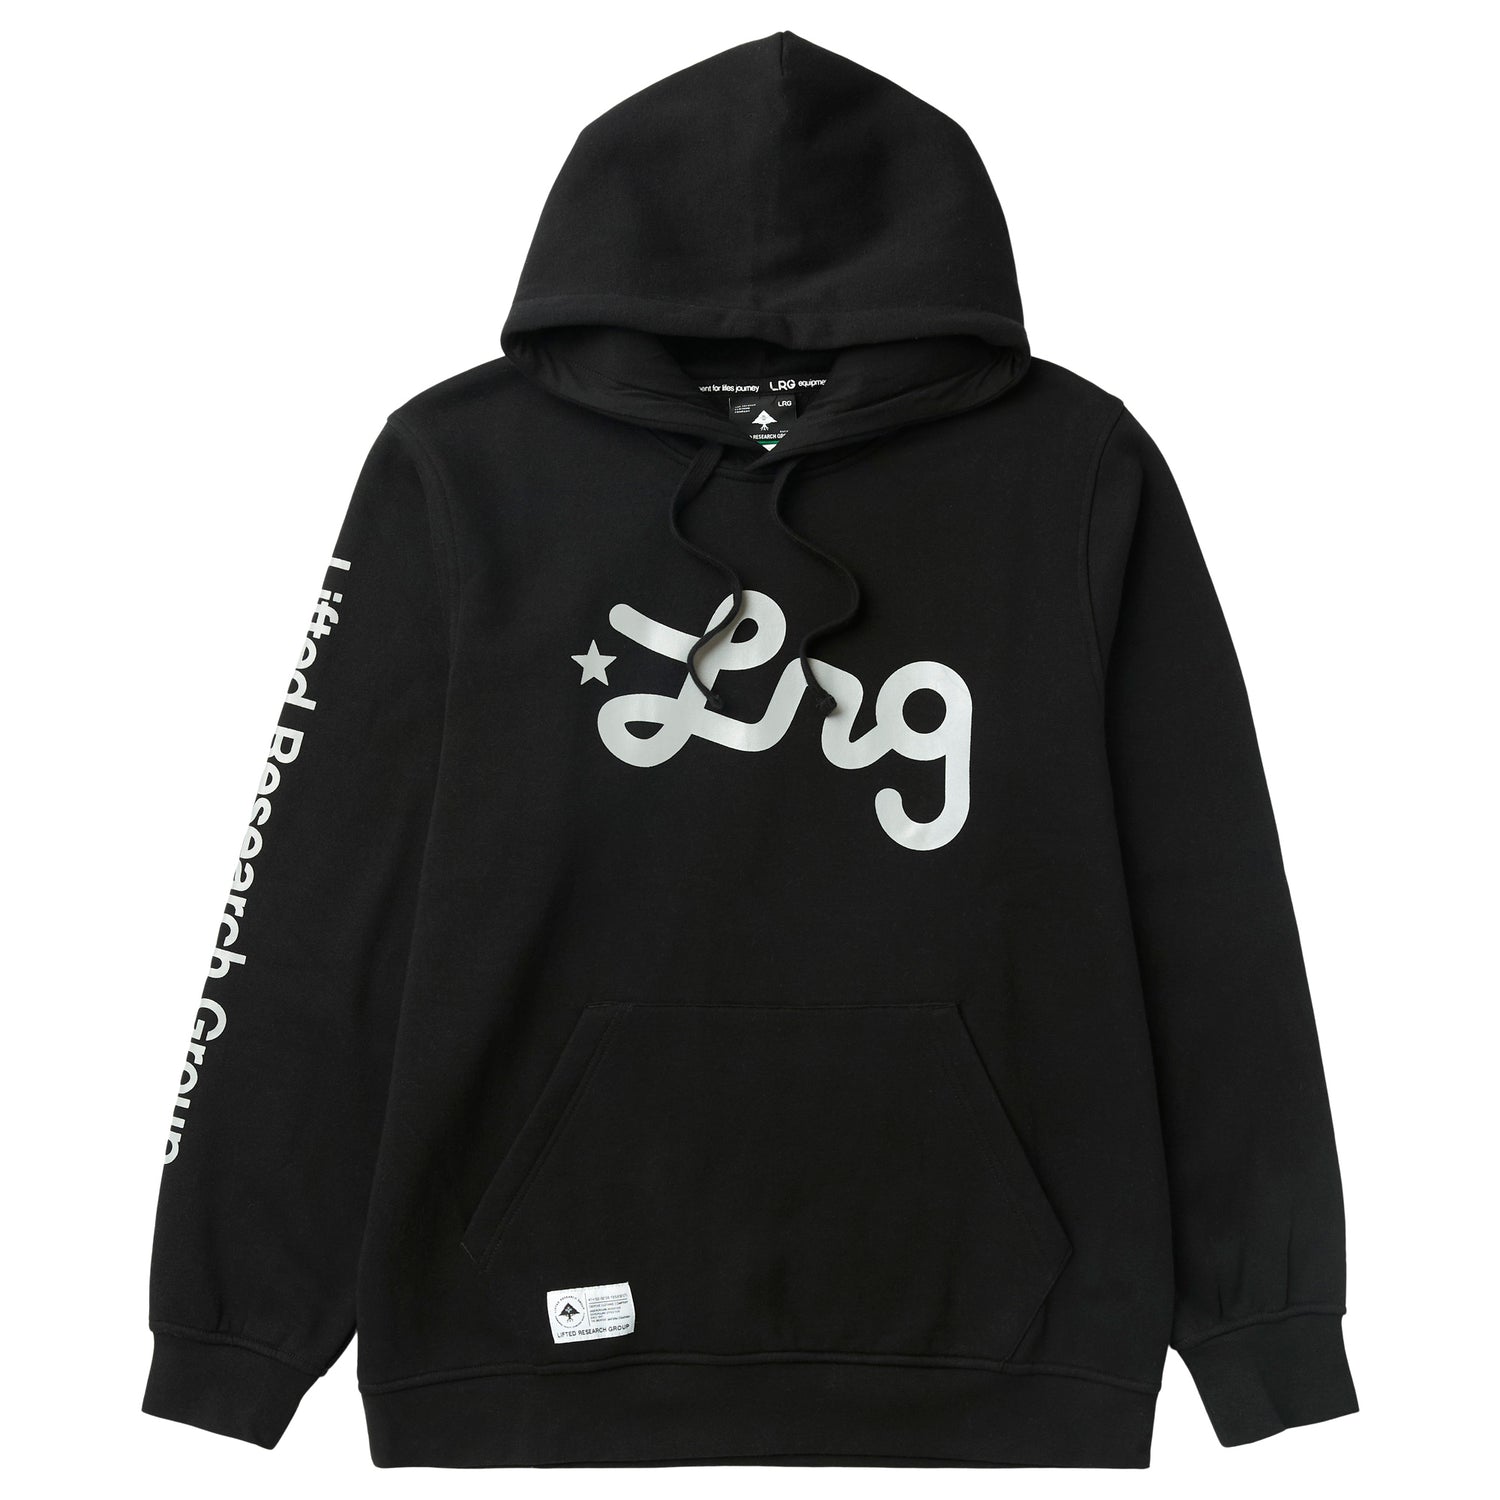 REFLECTIVE LIFTED SCRIPT PULLOVER HOODIE - BLACK